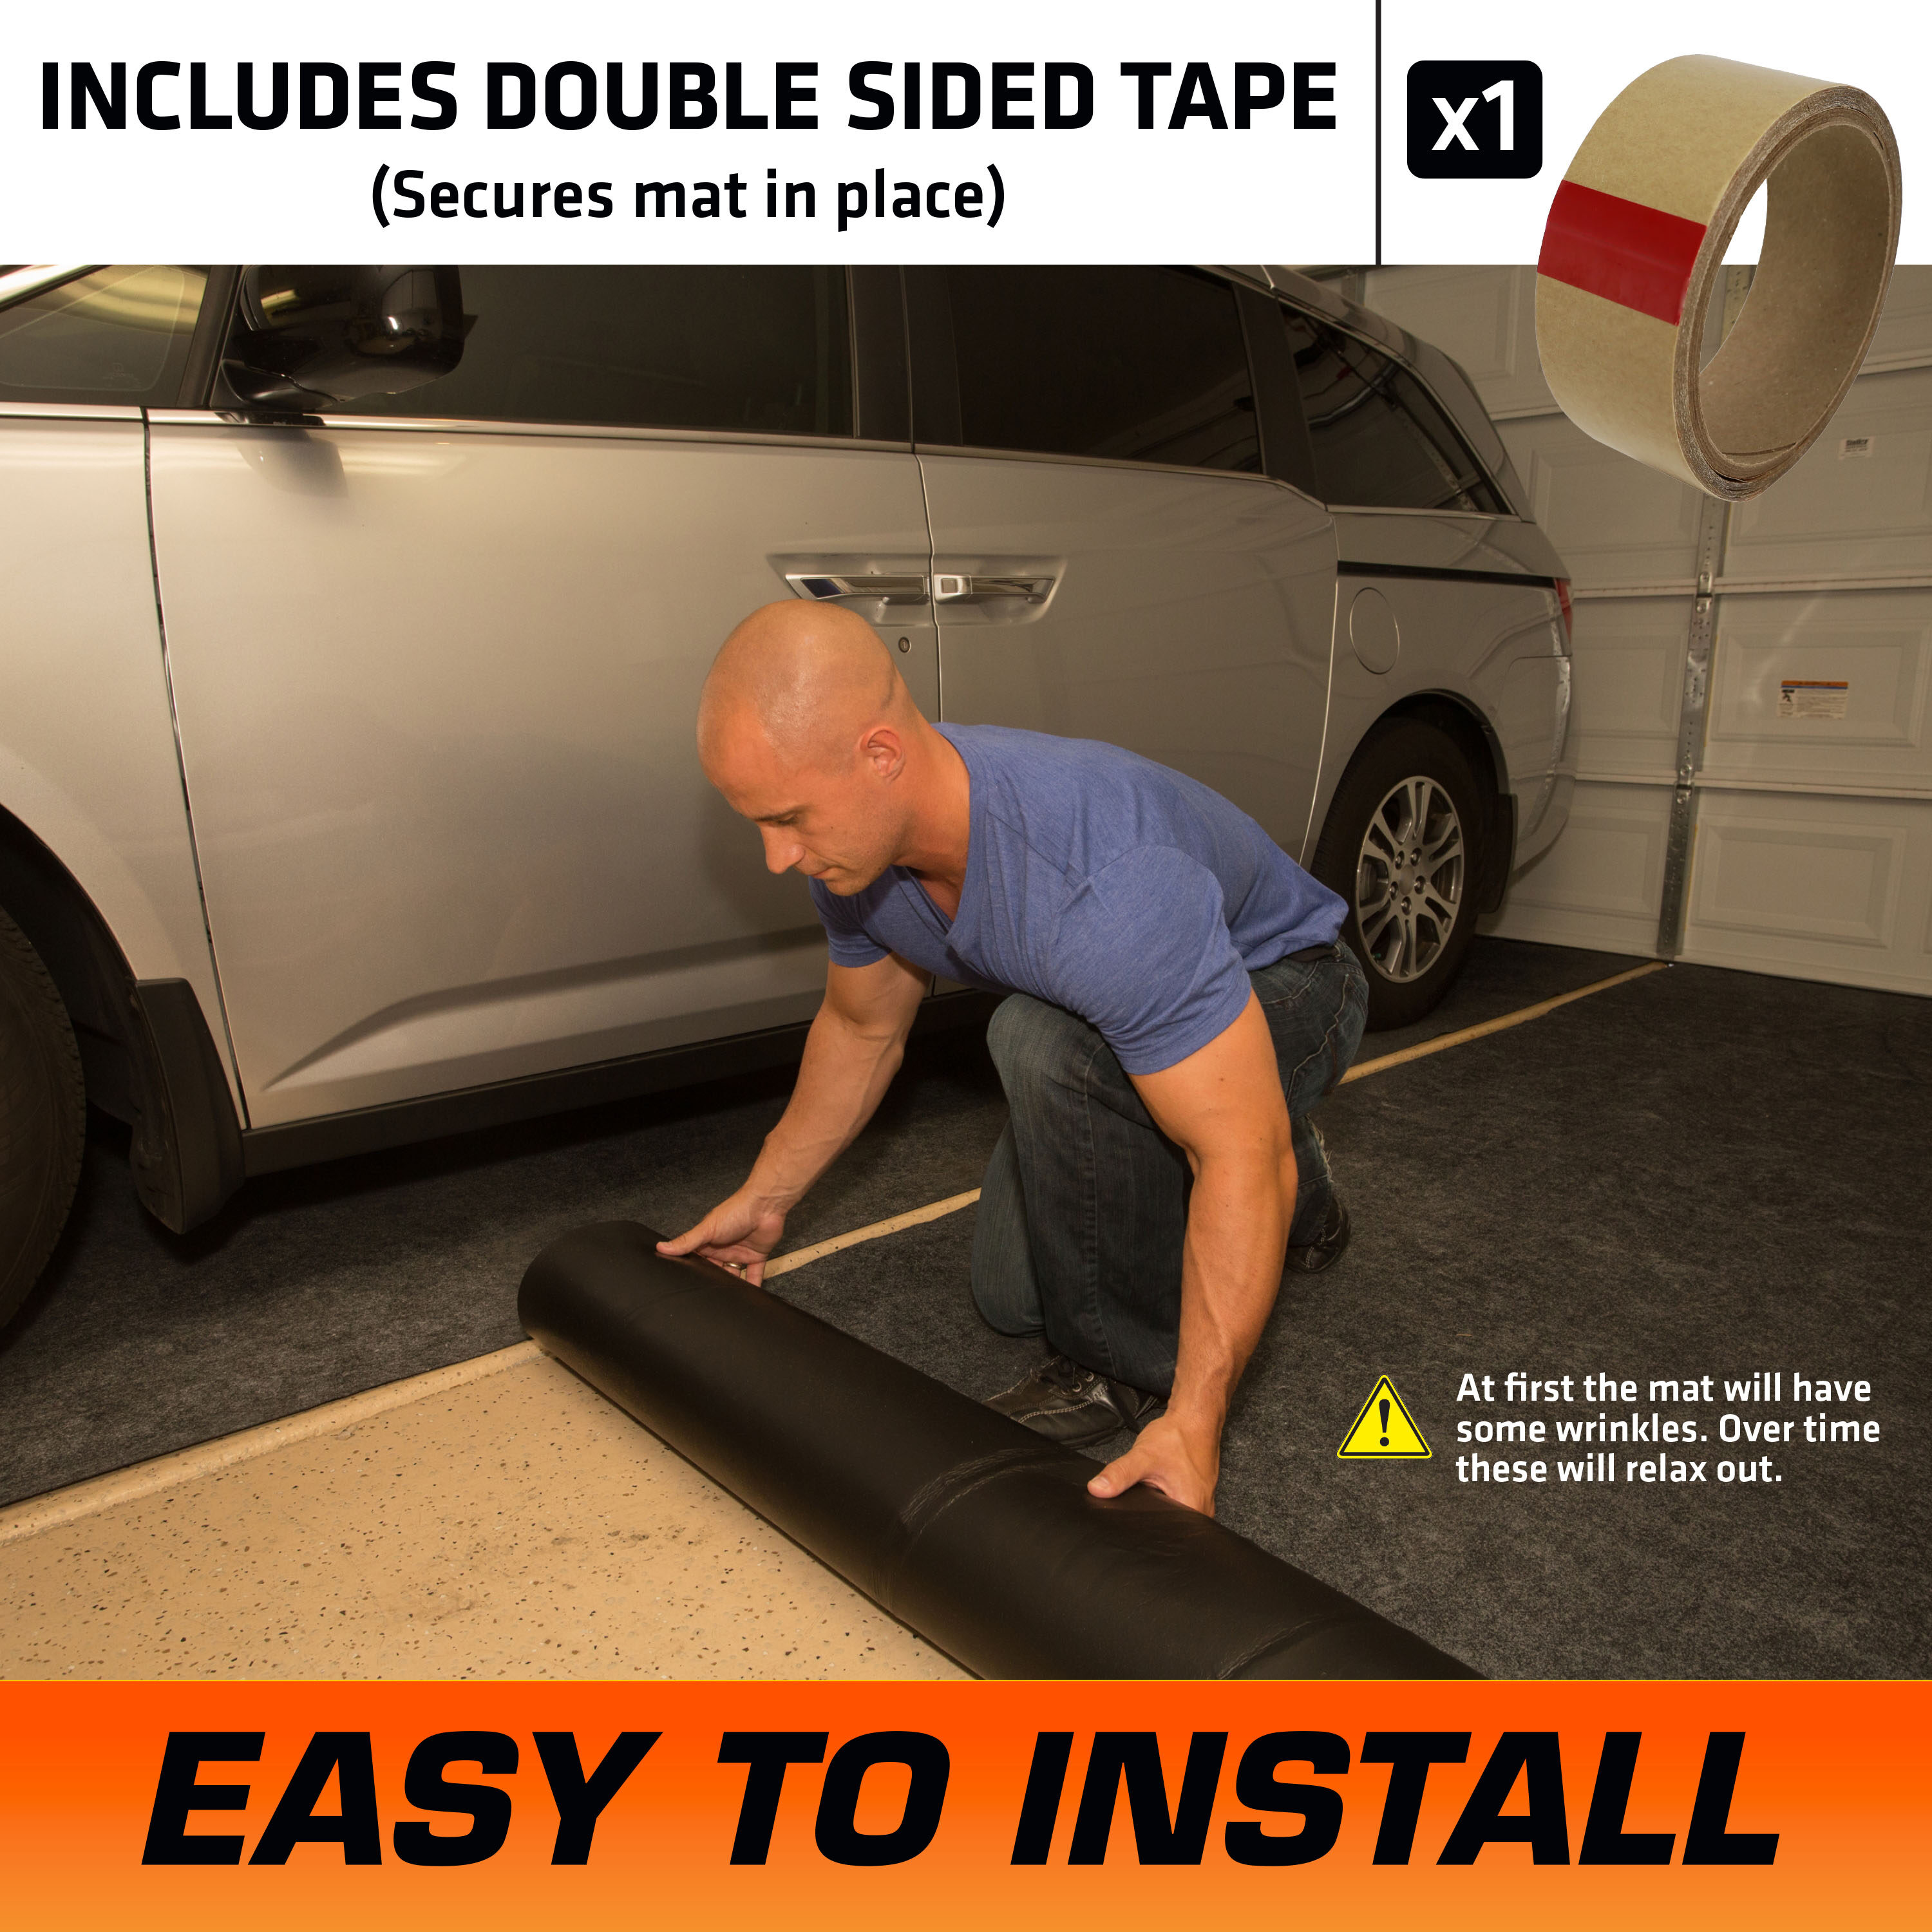 Garage Mats and Knee Mats for Working on Your Truck or Car